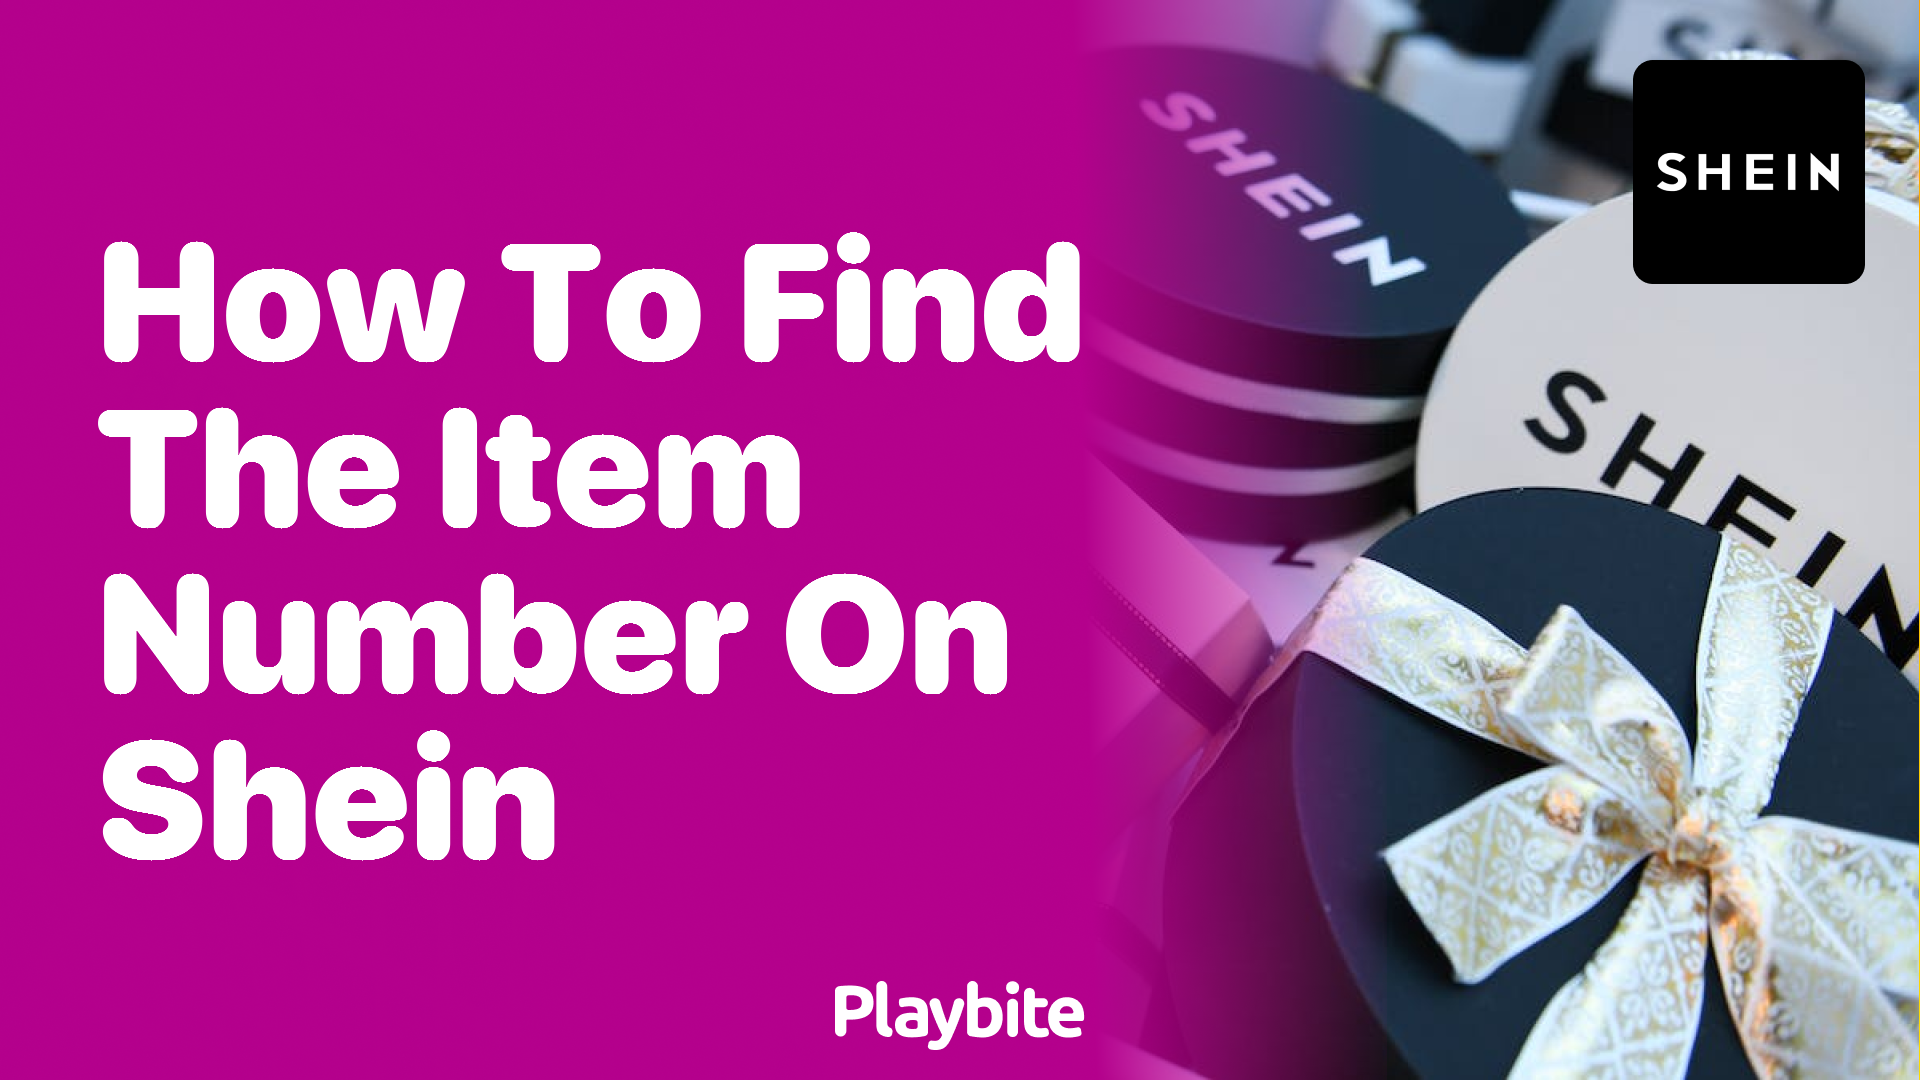 How to Find the Item Number on SHEIN - Playbite